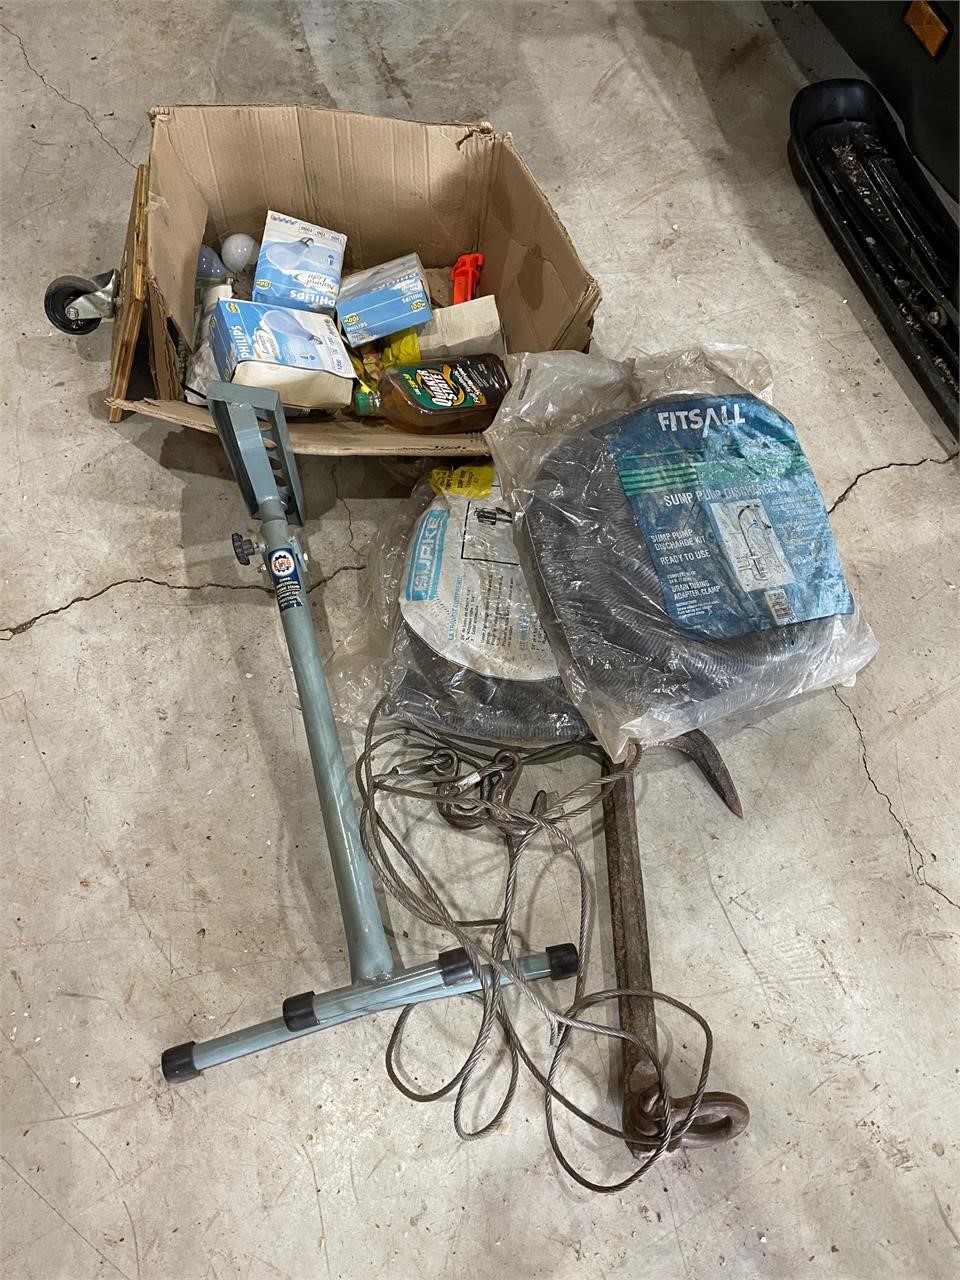 Large Hook, Roller stand, sump pipe, etc.